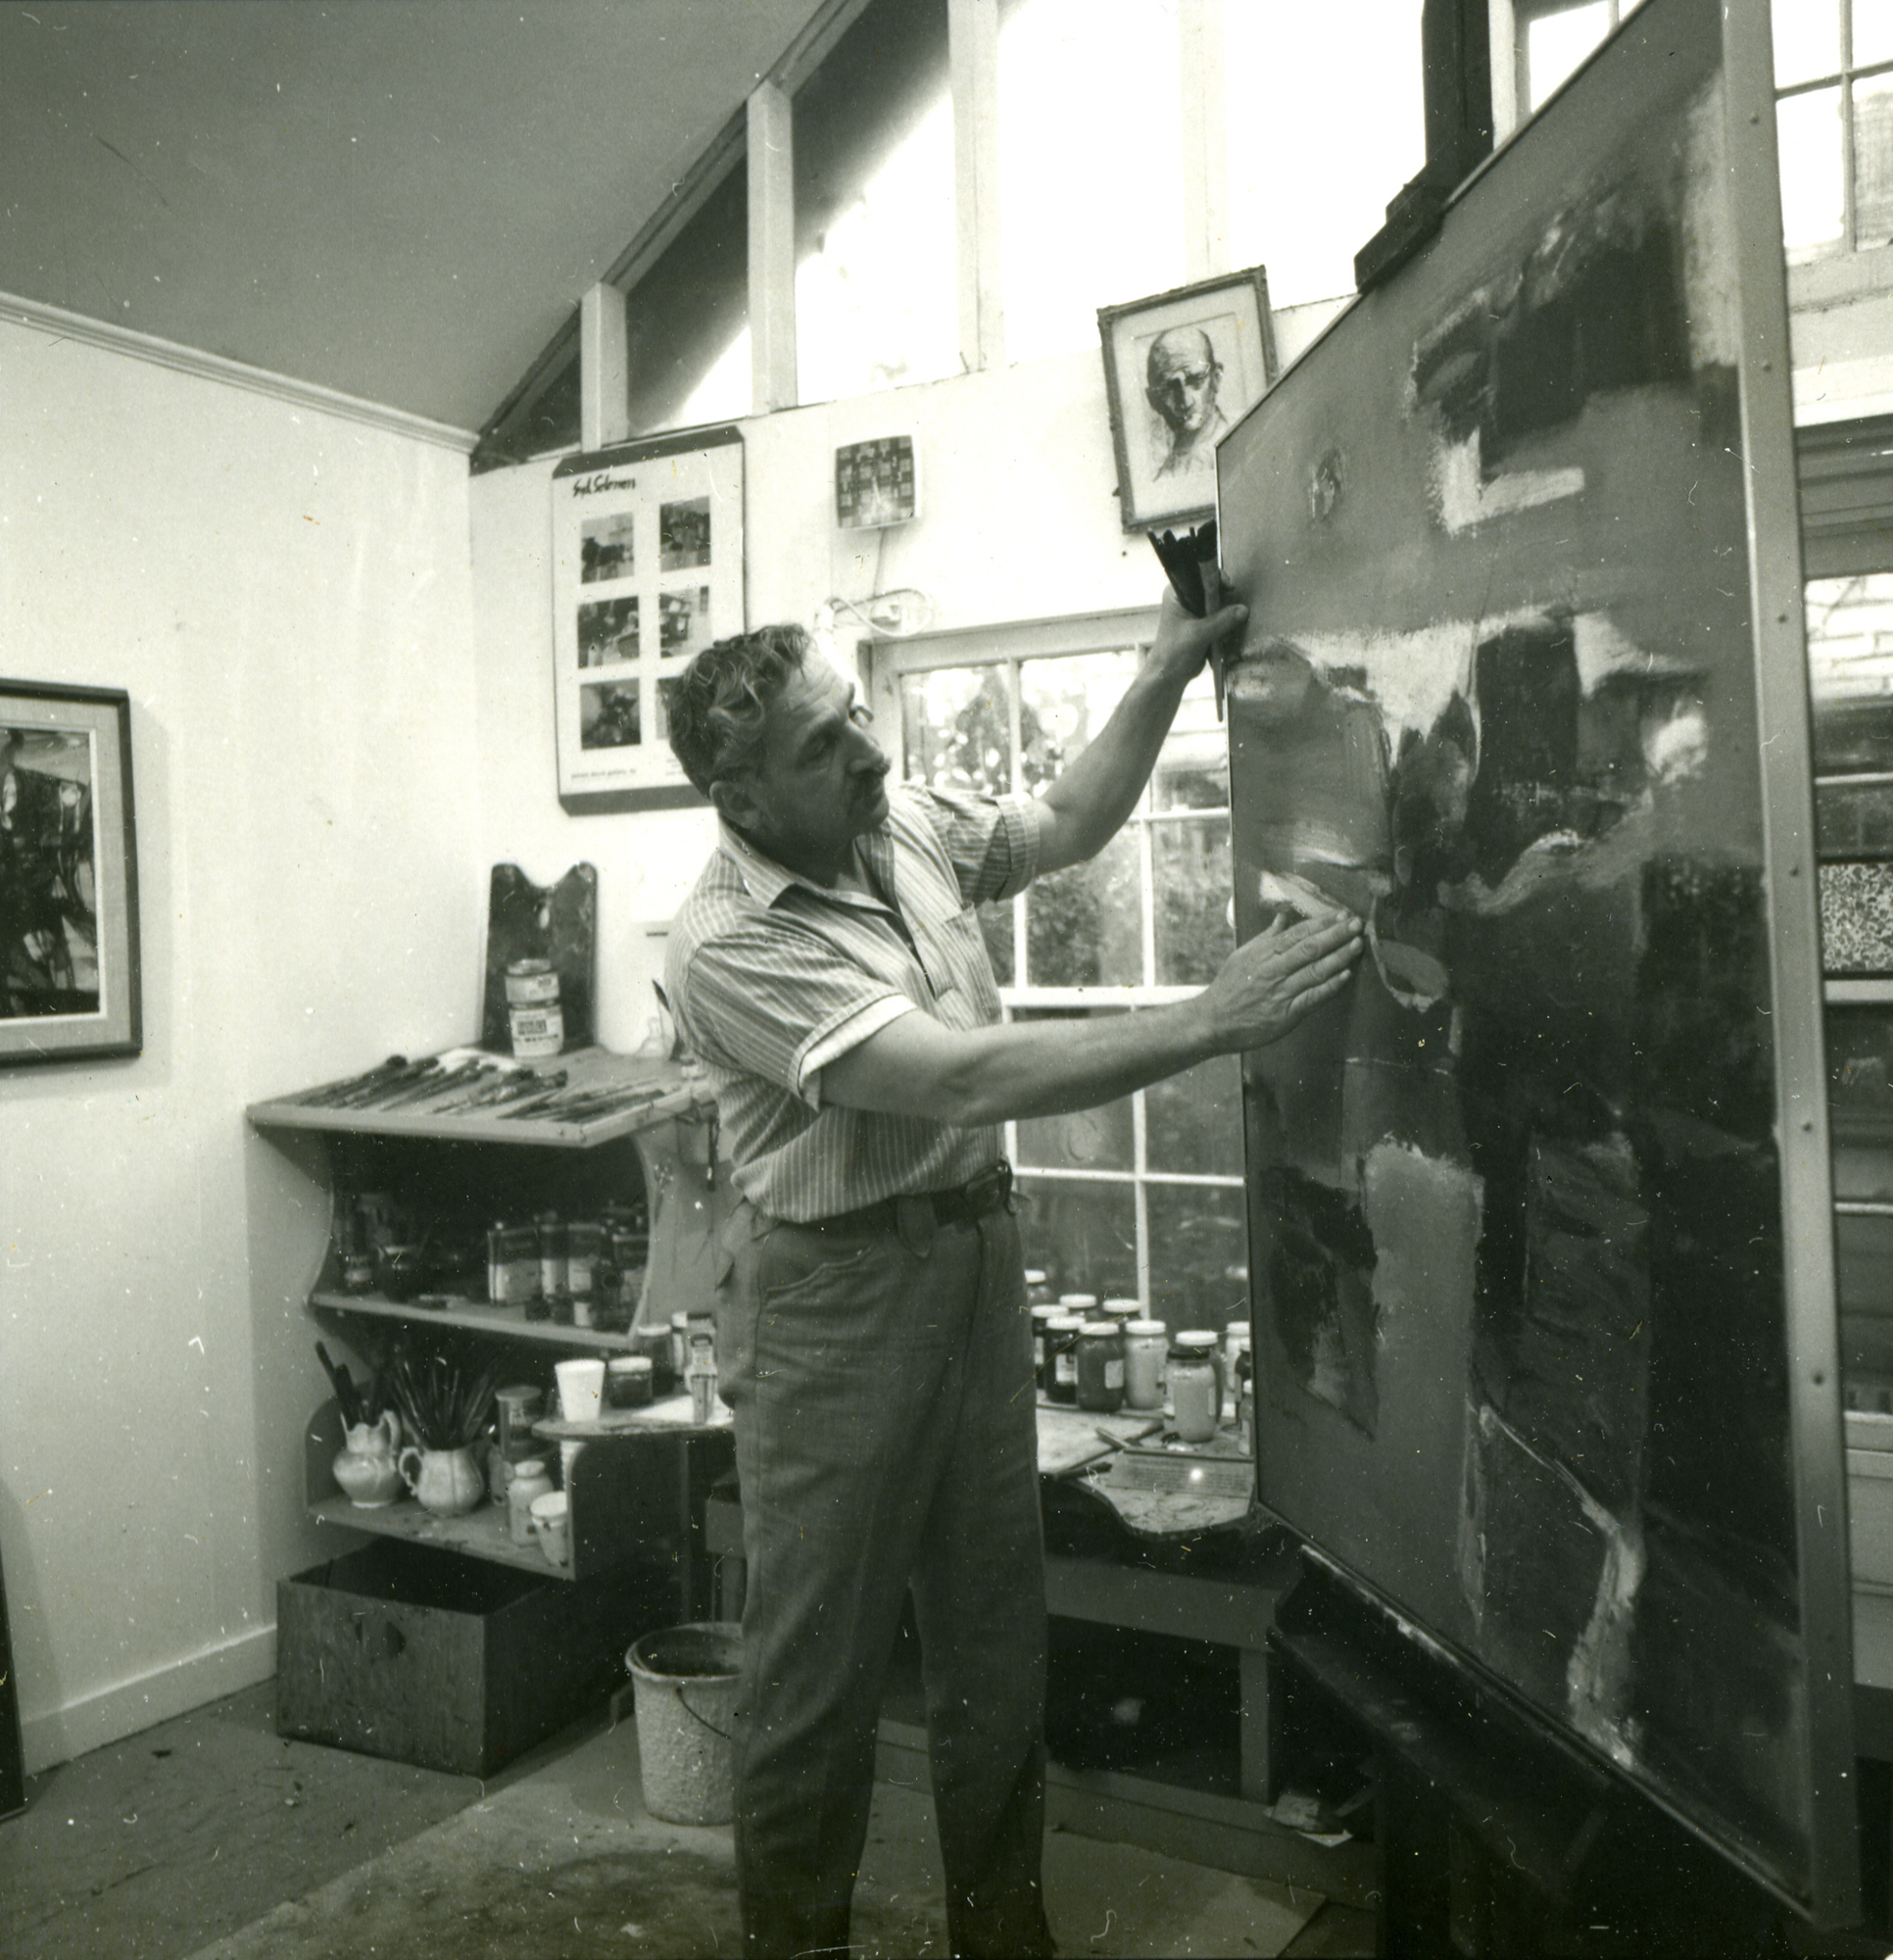 Syd Solomon is also known for his Midnight Pass home and studio he helped Gene Leedy, one of the founders of the Sarasota School of Architecture, design on Siesta Key. Photo courtesy of the Solomon Archive